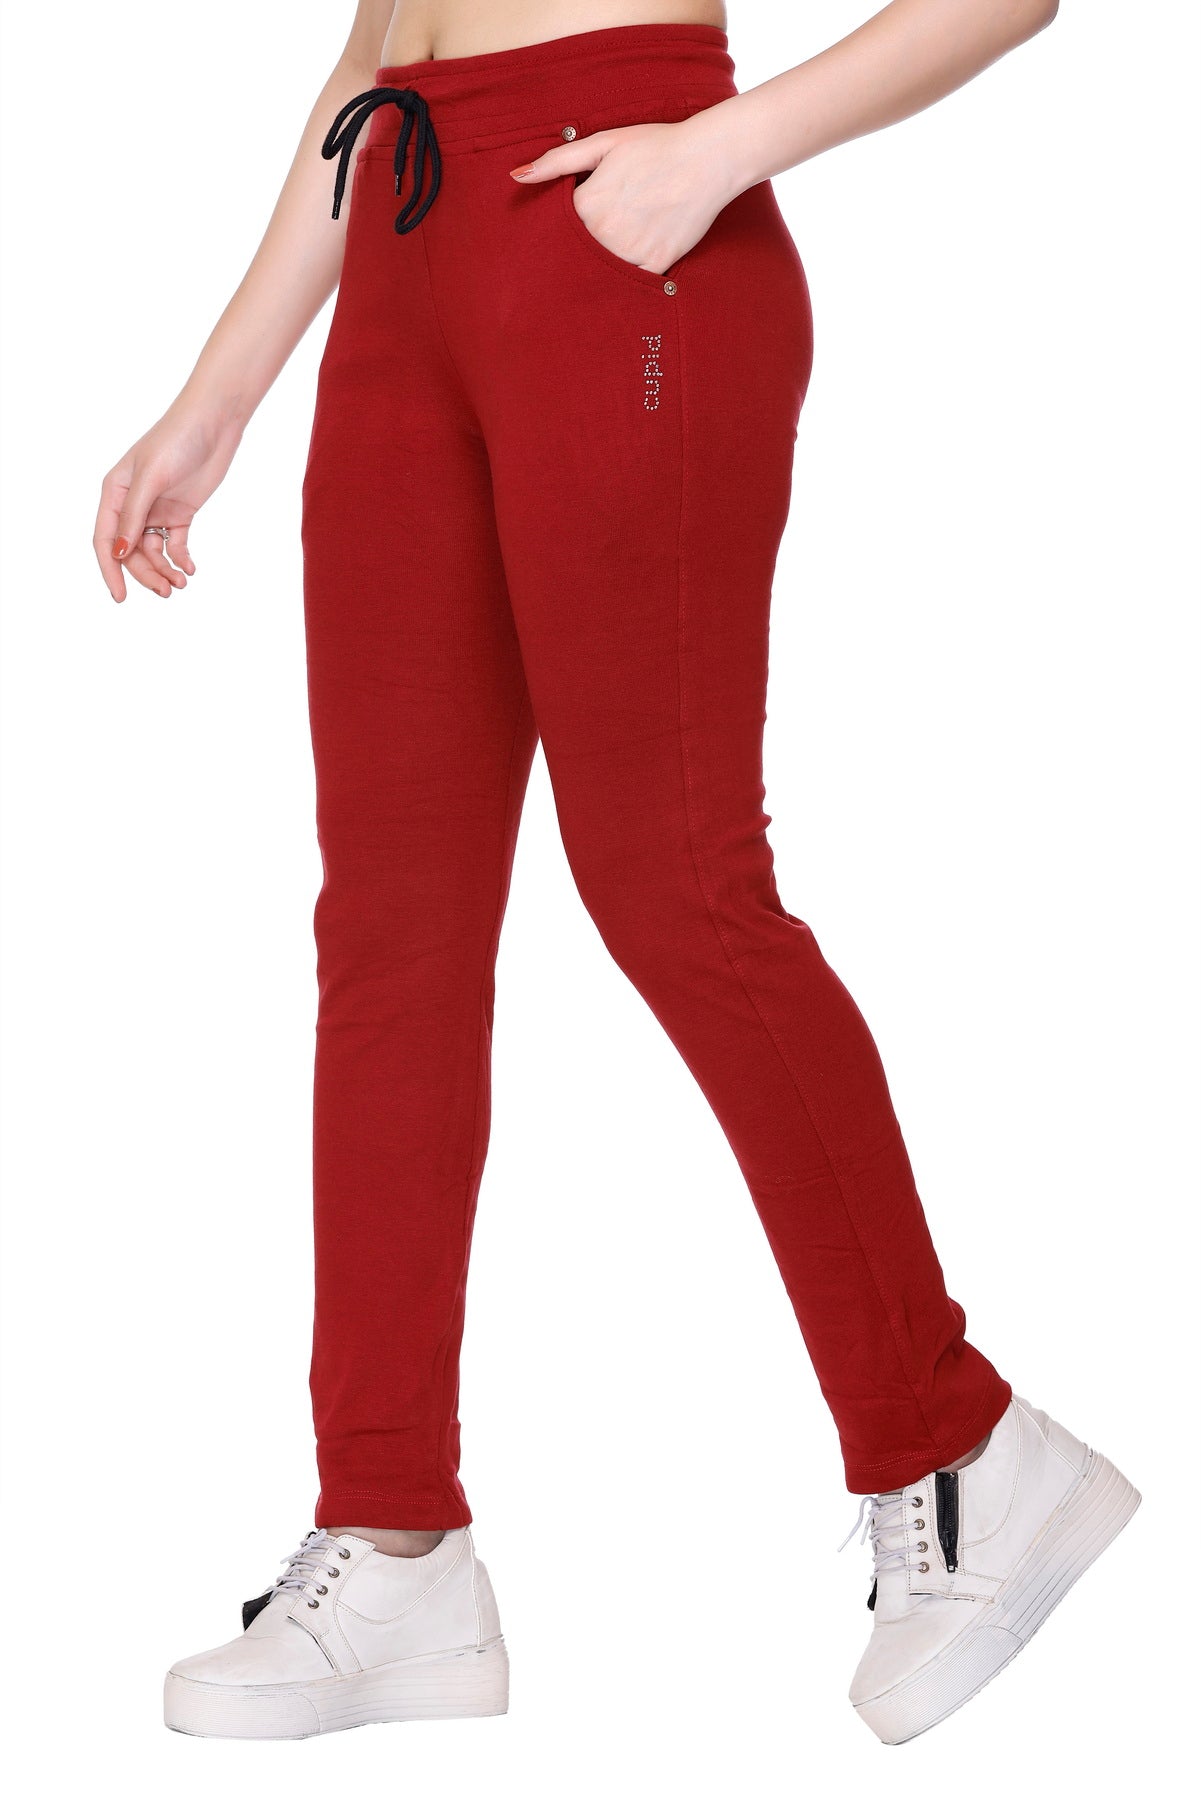 Stylish Cotton Lycra Activewear Trackpants for Women online in India